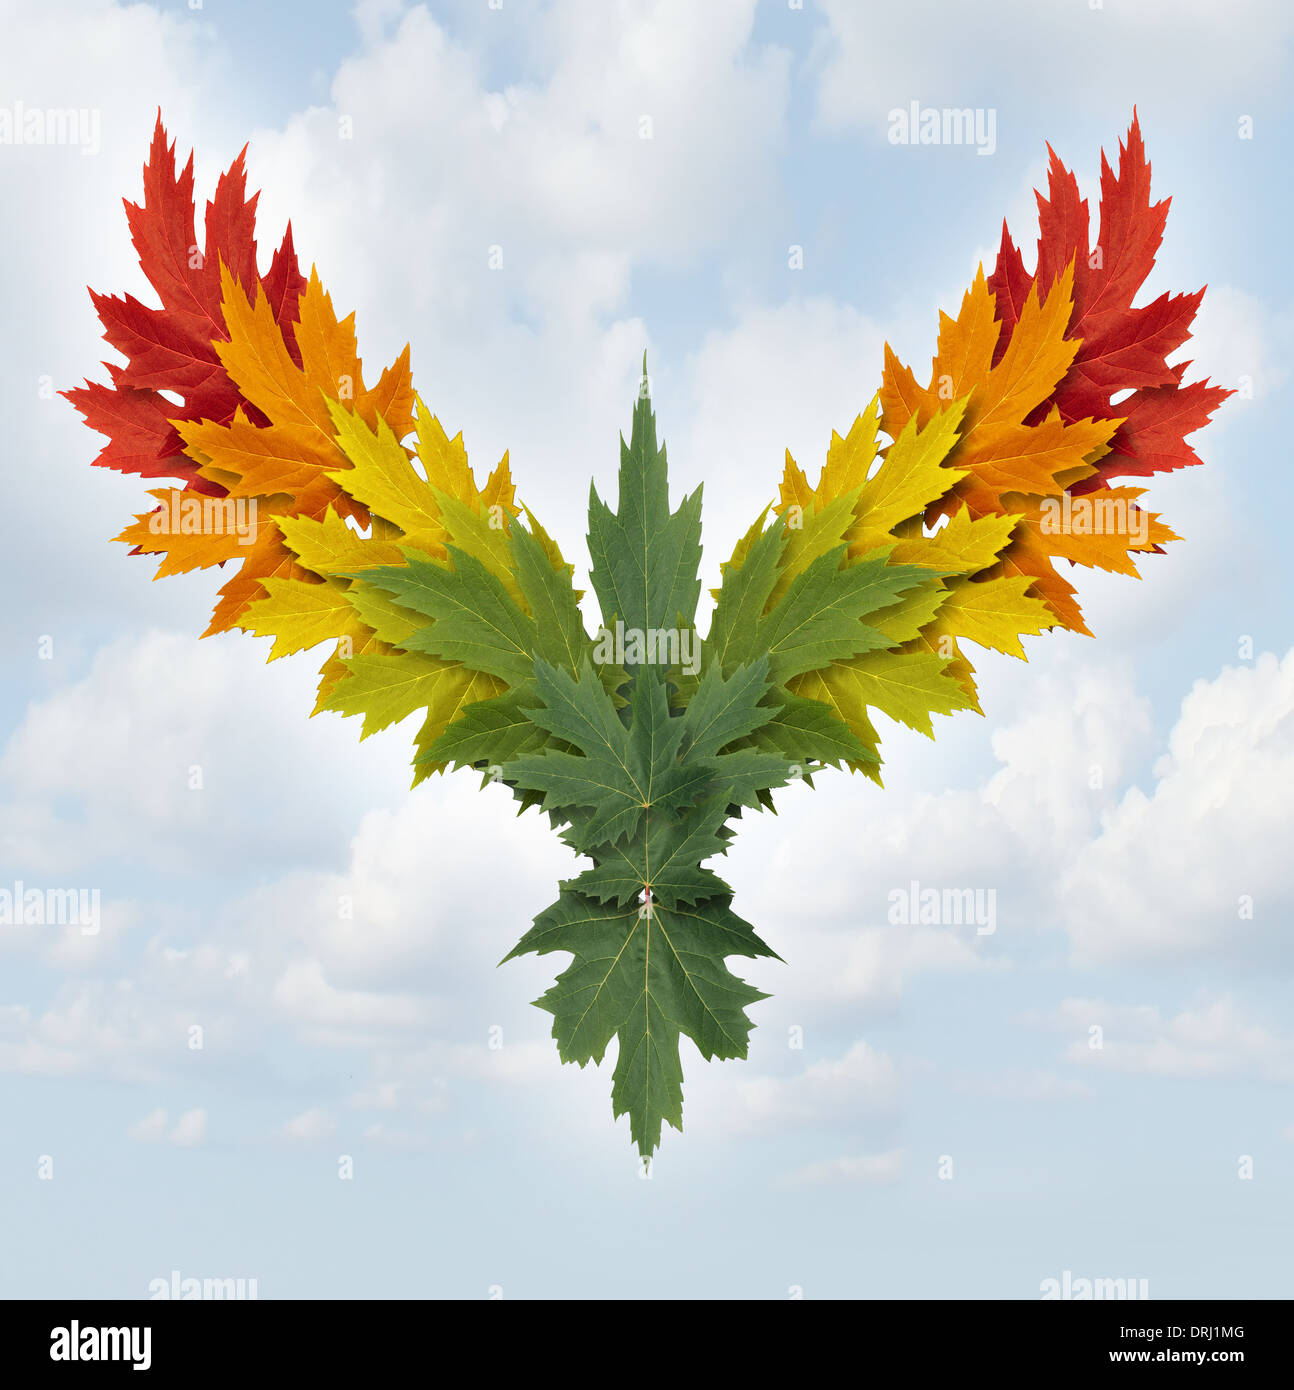 Wings of nature symbol as tree leaves with different colors shaped as a flying majestic bird as a metaphor for success growth and freedom in business and environment conservation issues. Stock Photo